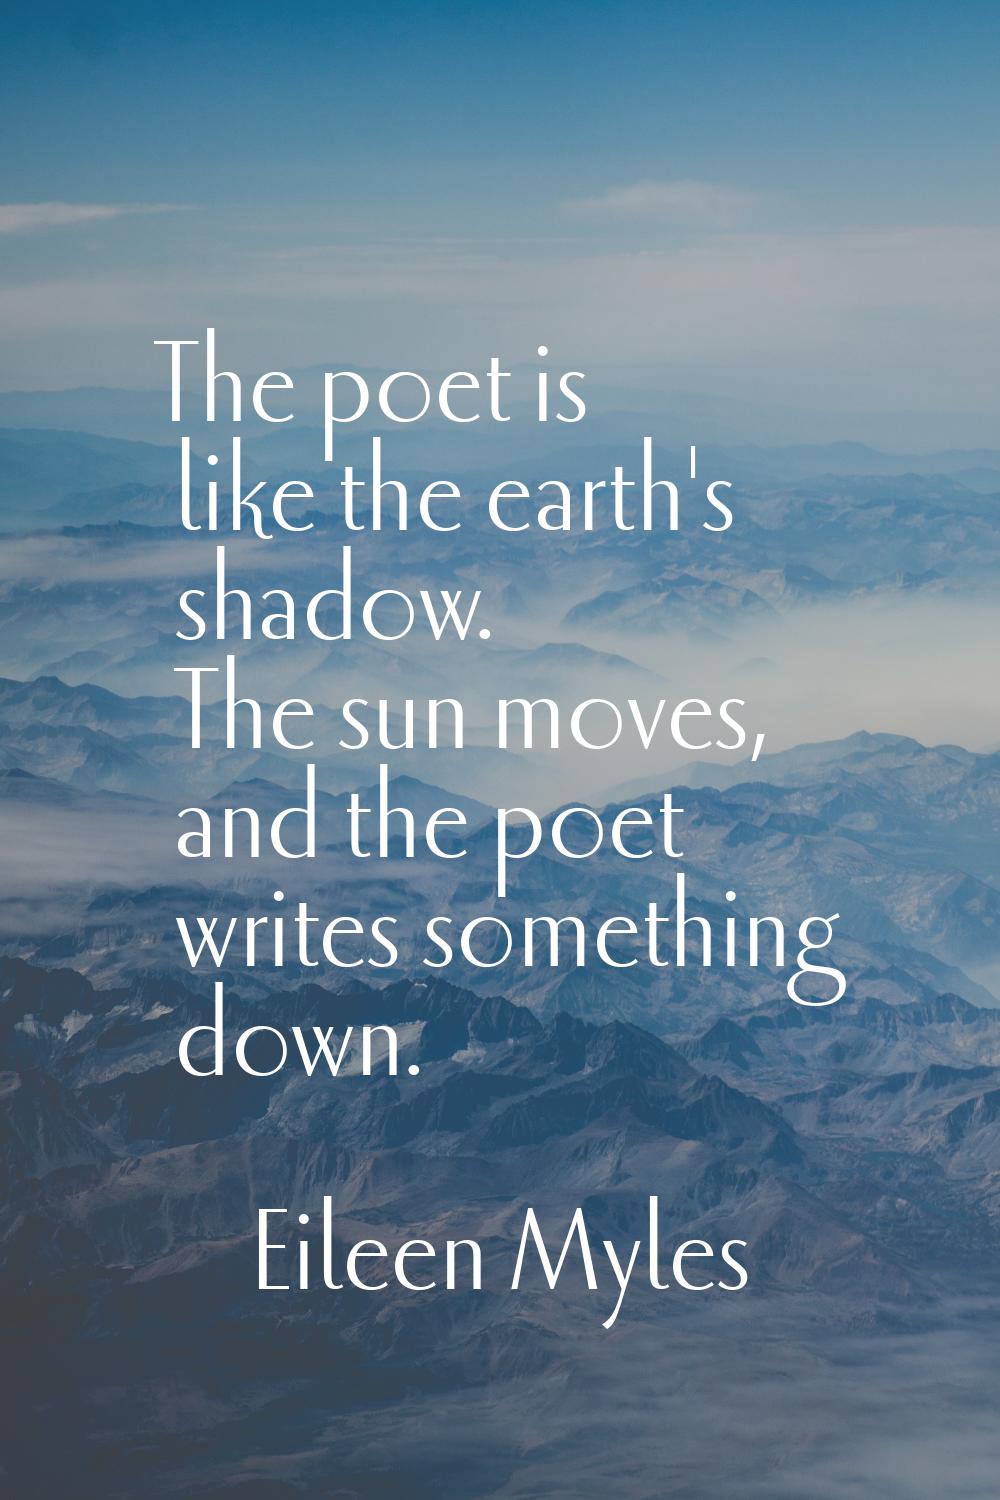 The poet is like the earth's shadow. The sun moves, and the poet writes something down.